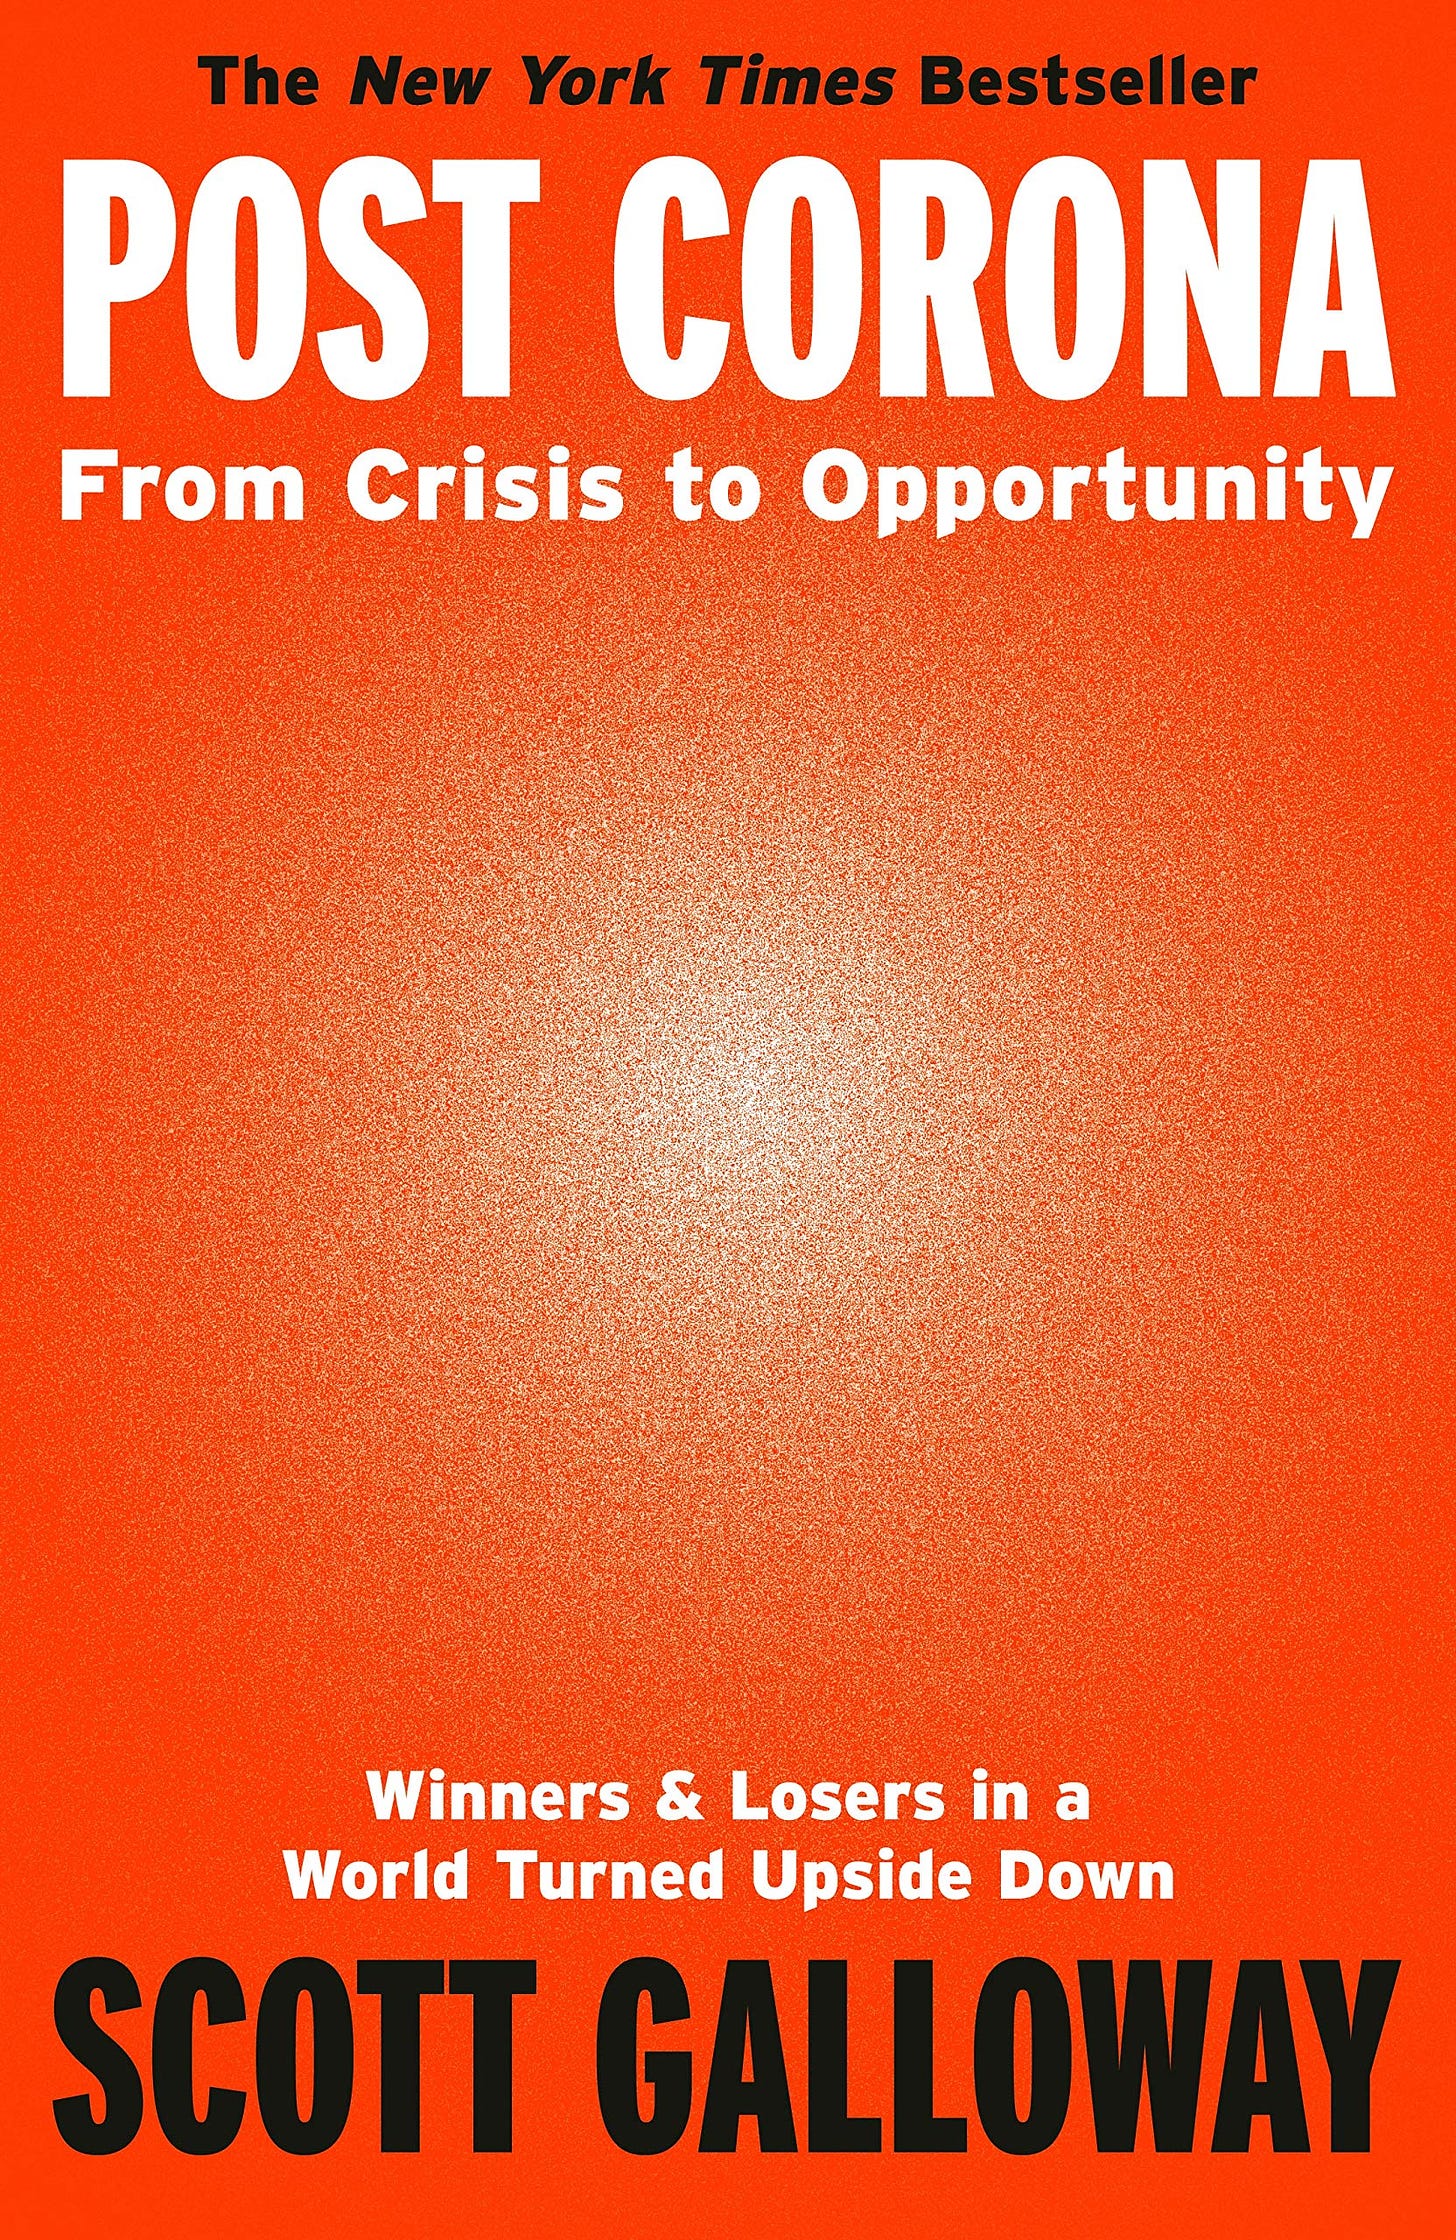 Post Corona: From Crisis to Opportunity | Amazon.com.br